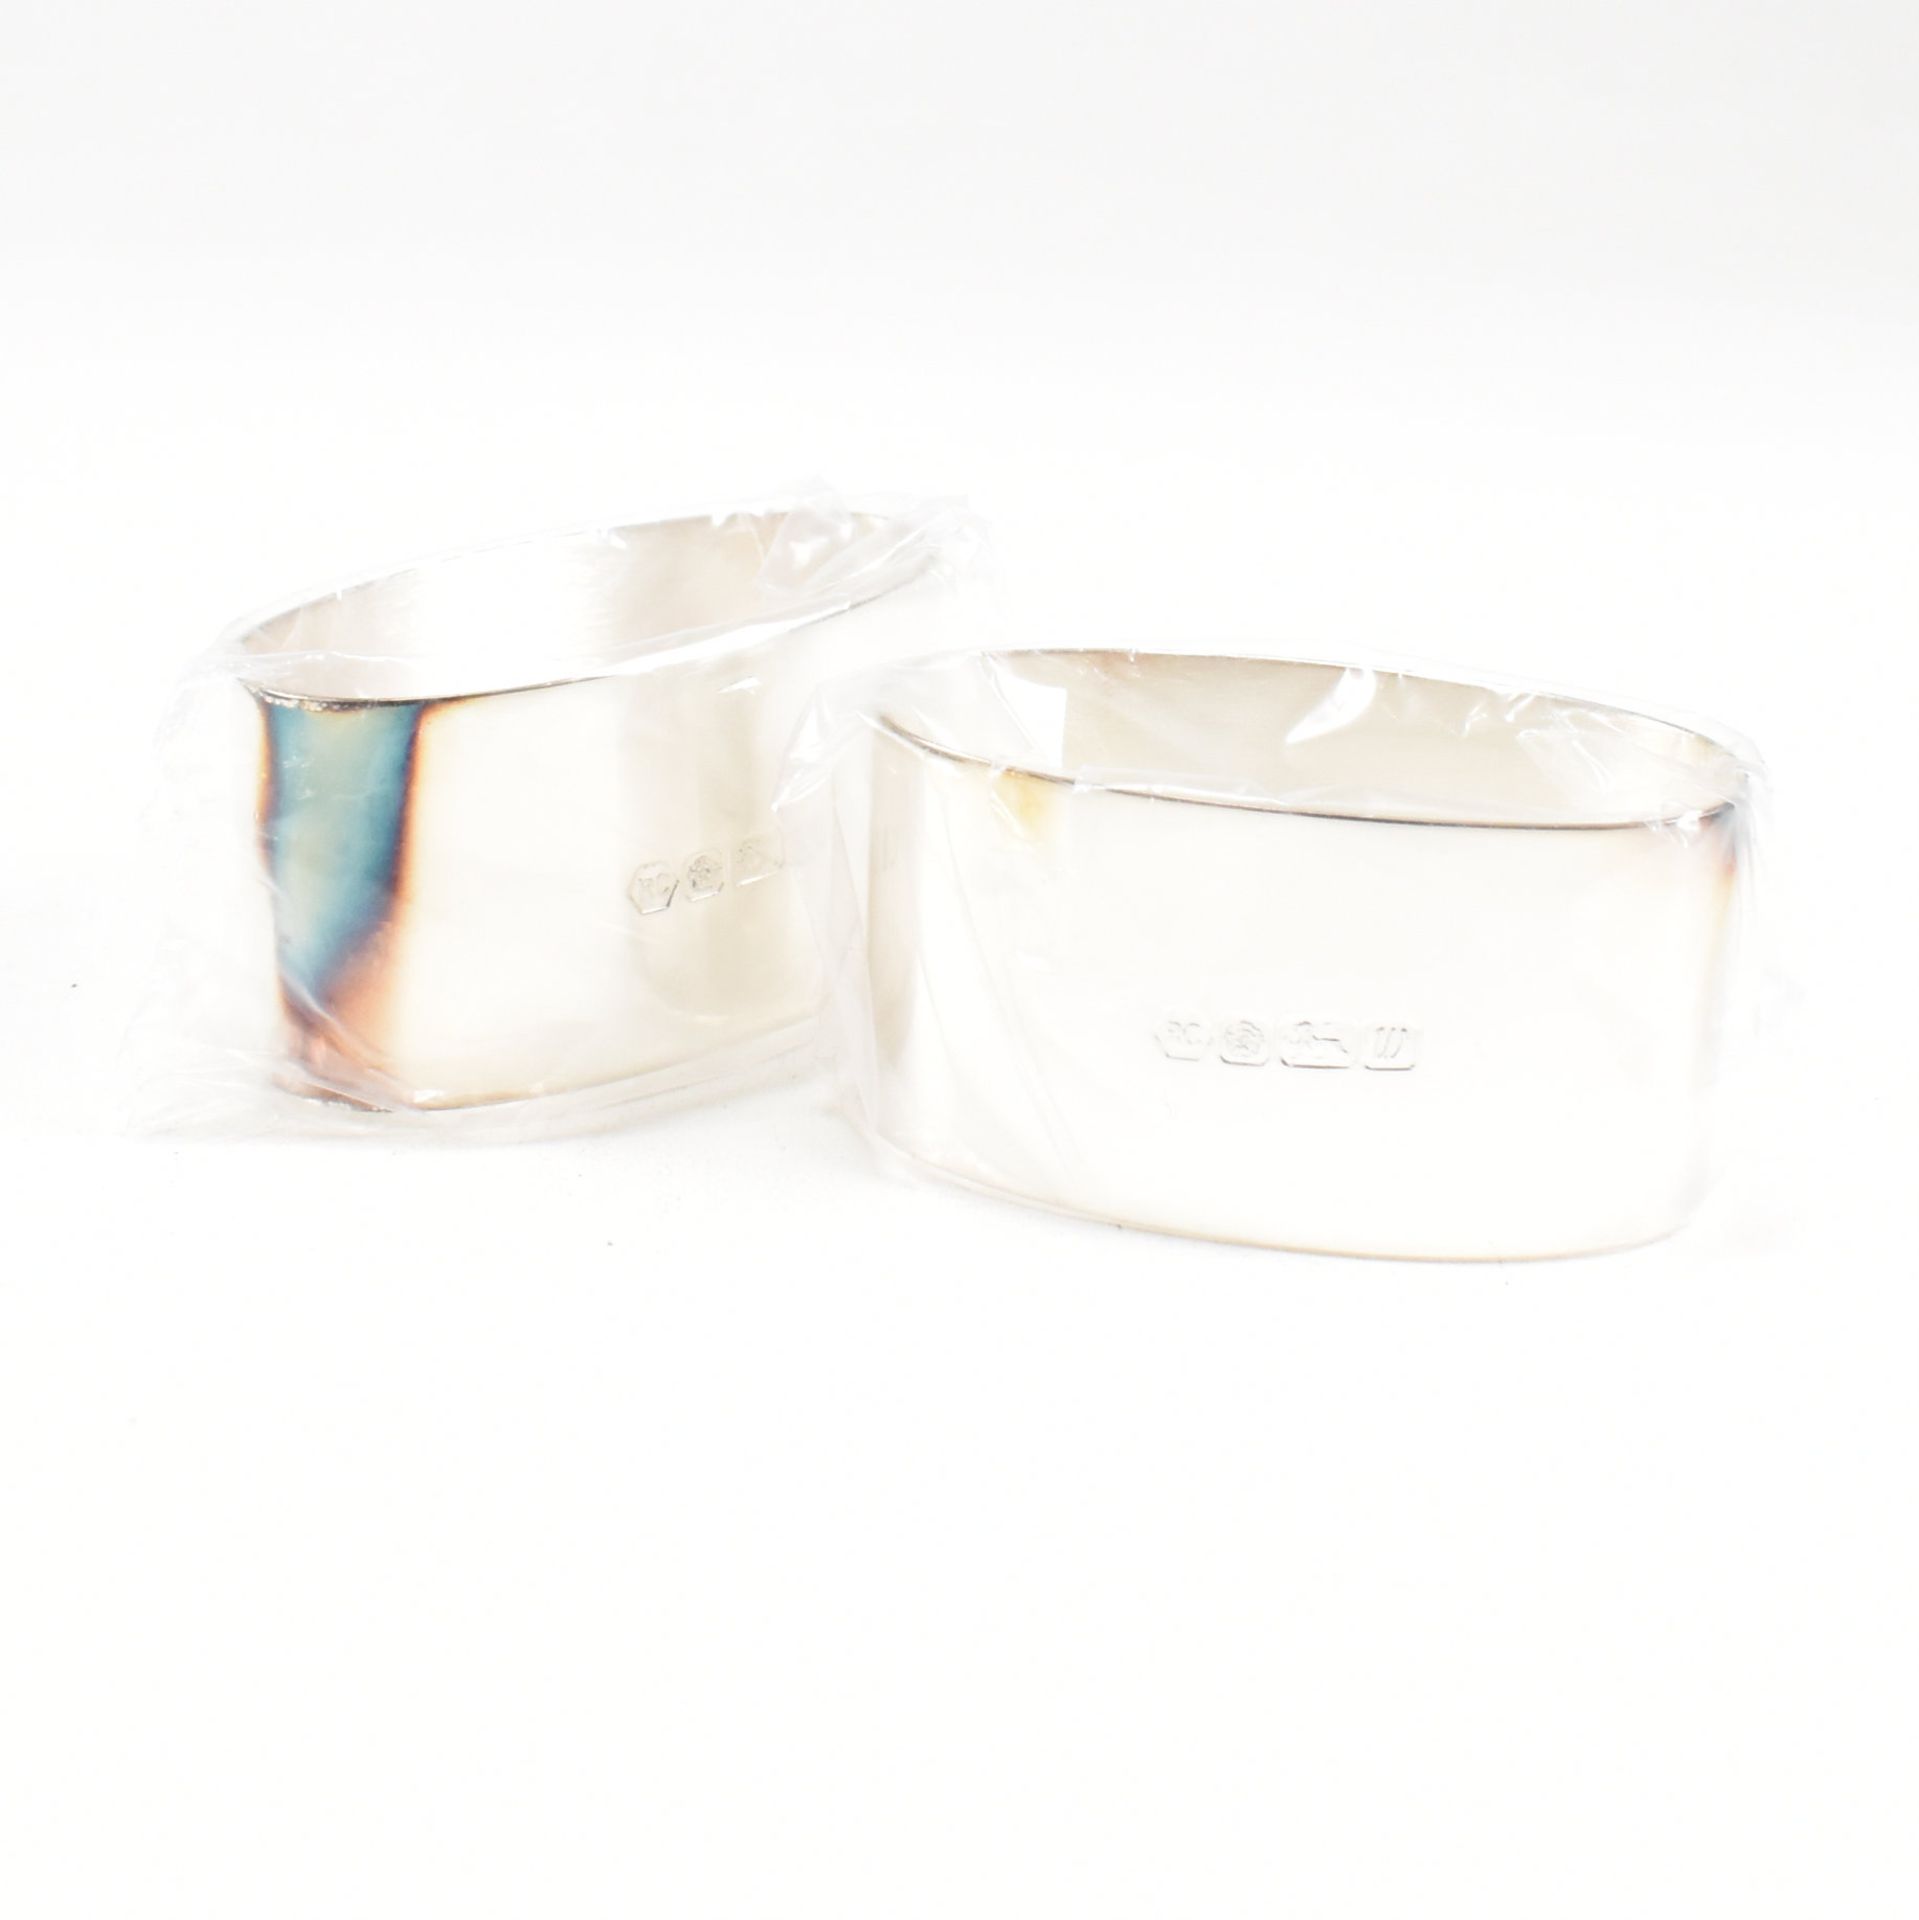 1990S CASED PAIR OF NAPKIN RINGS - Image 6 of 11